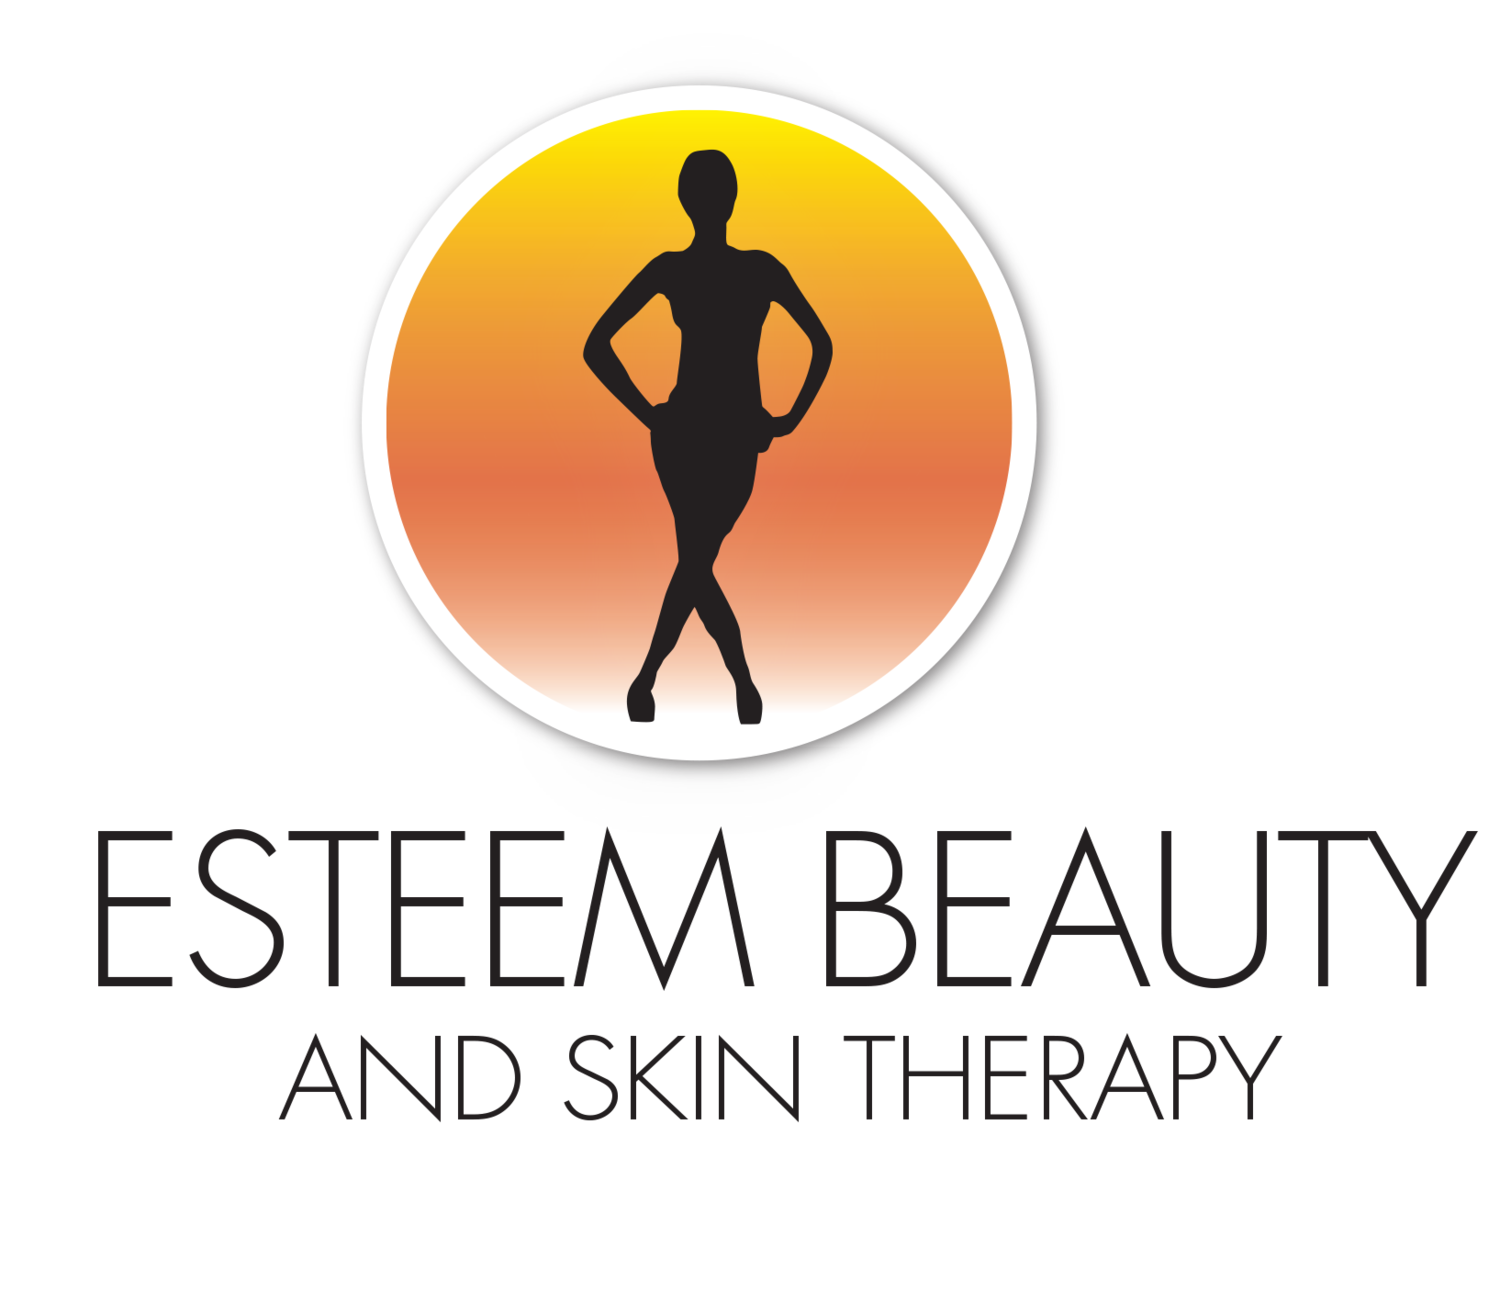 Esteem Beauty Therapy- WE PROVIDE PROFESSIONAL SKIN AND BEAUTY SERVICES WITH A WARM TOUCH  LET US HELP YOU FUTURE-PROOF YOUR SKIN TODAY